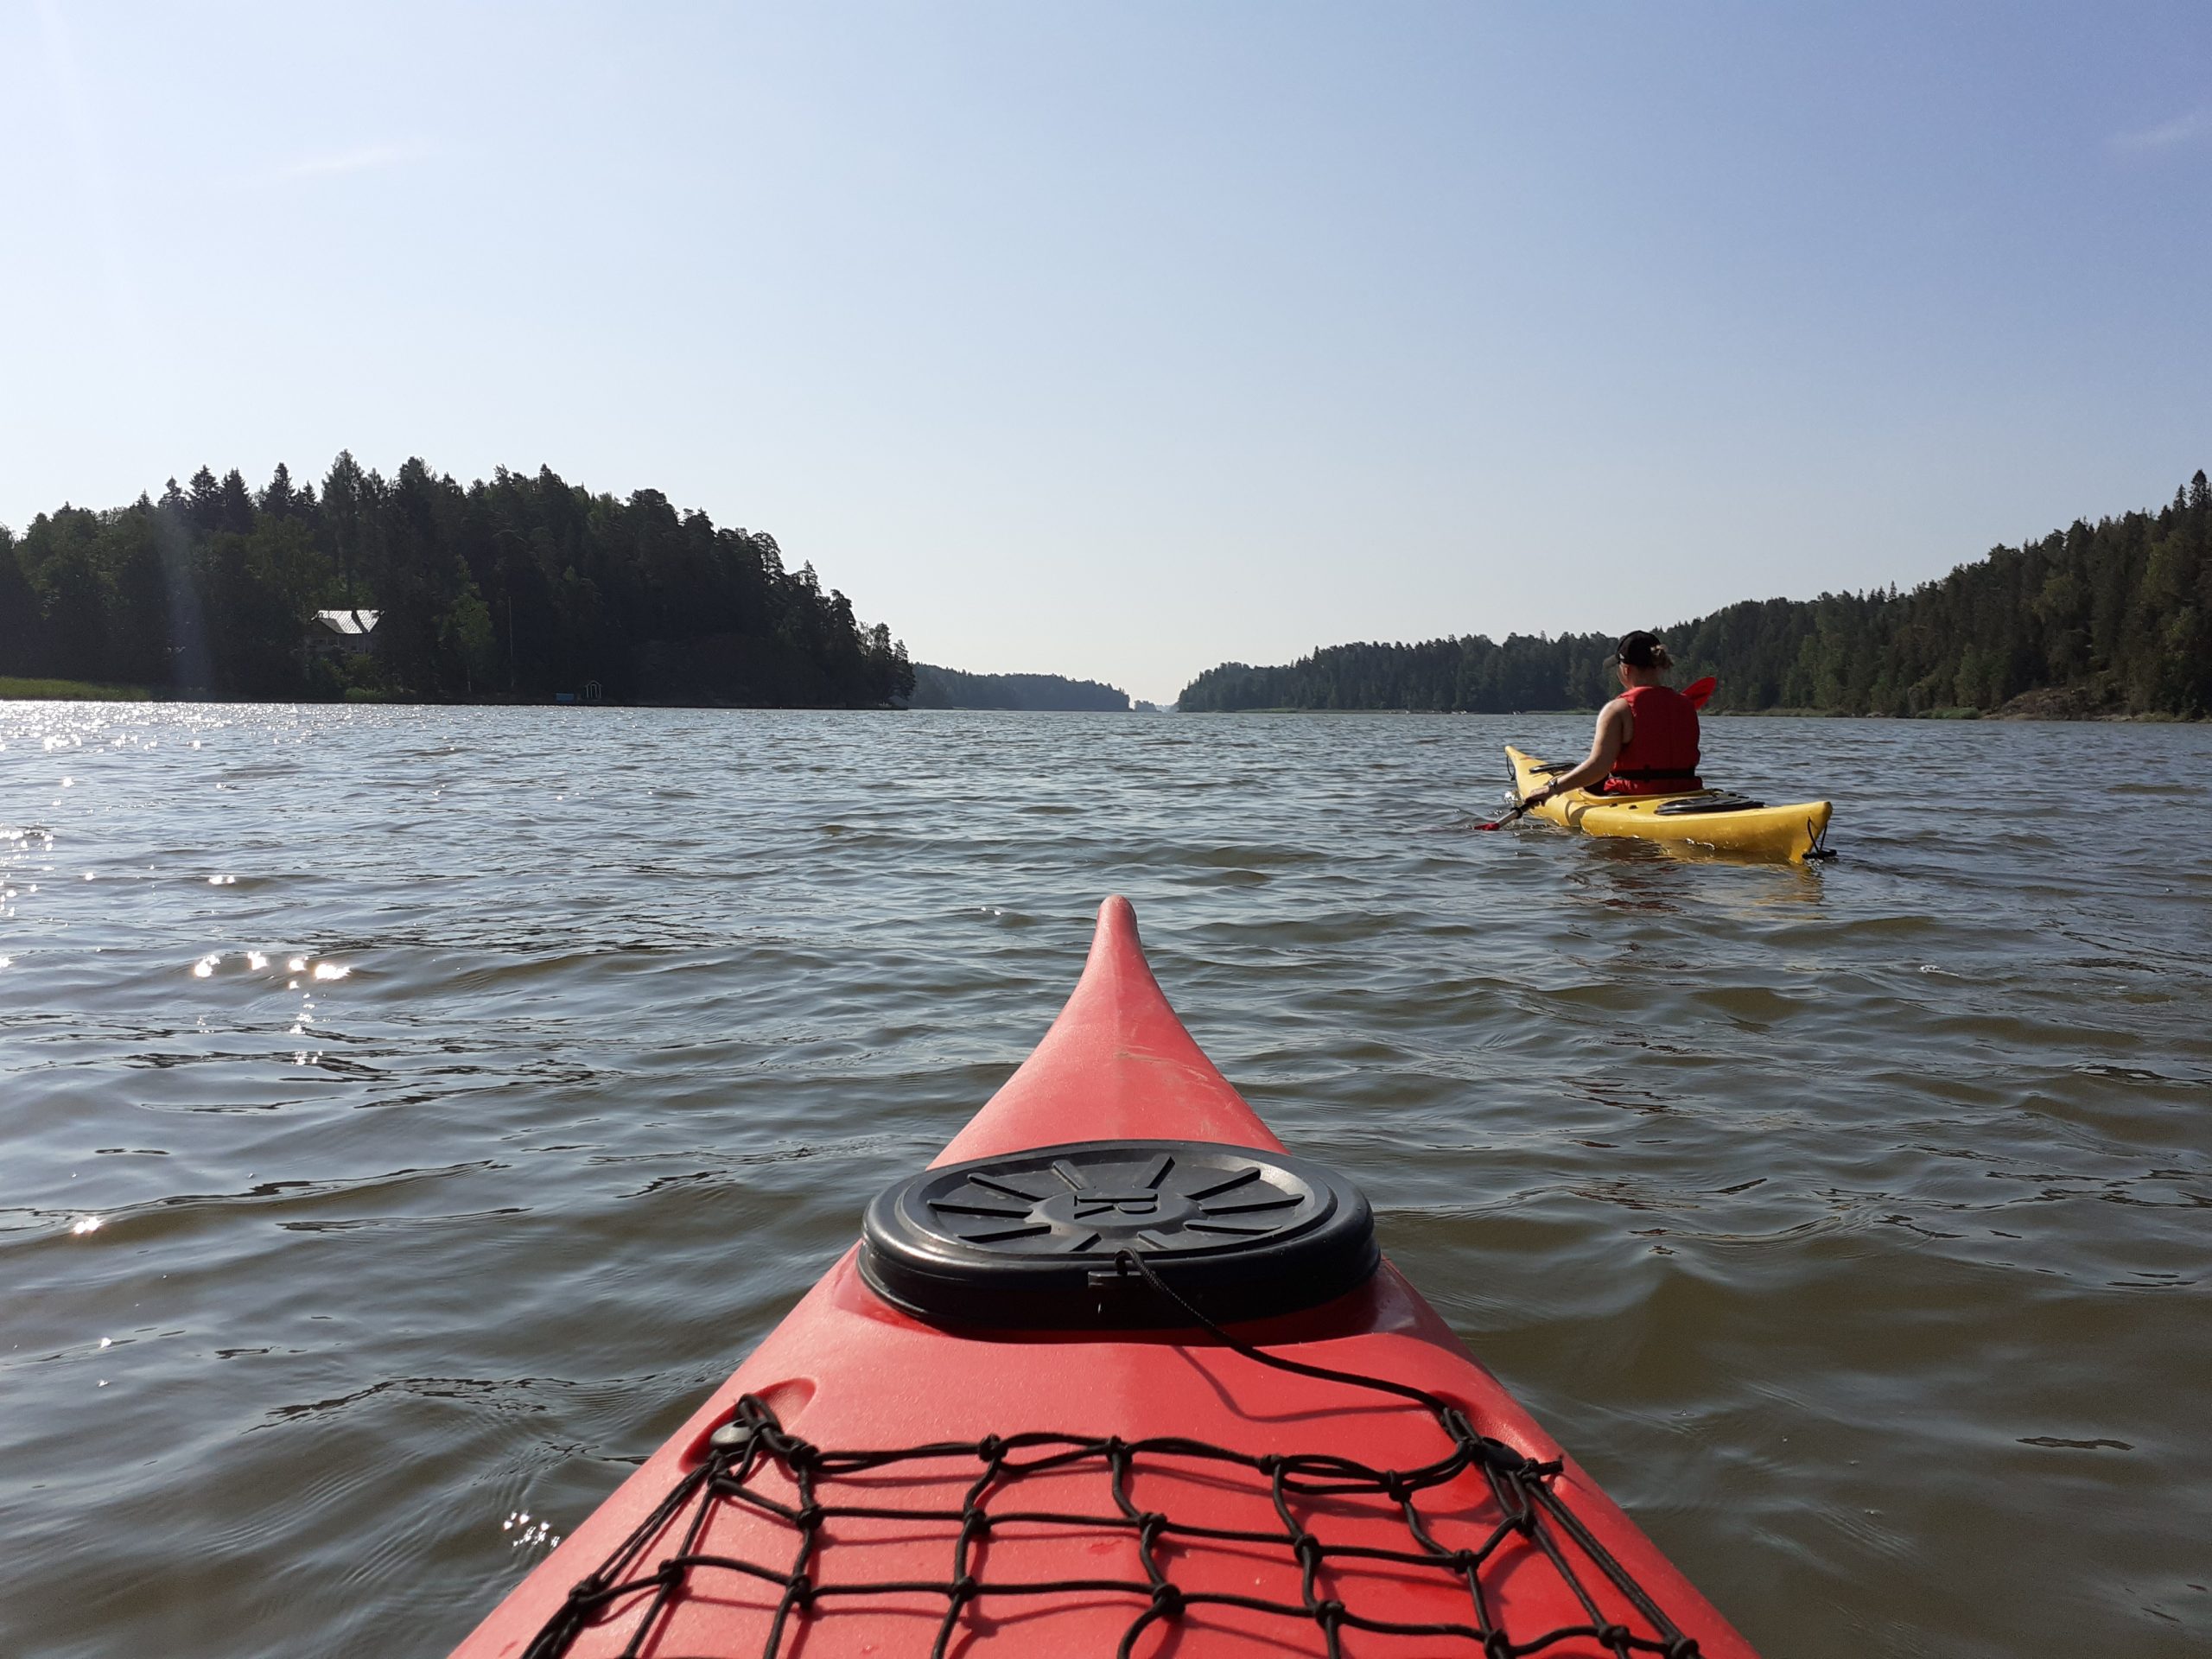 View from a kayak at Sipoo bay, with archipelago and another kayak.